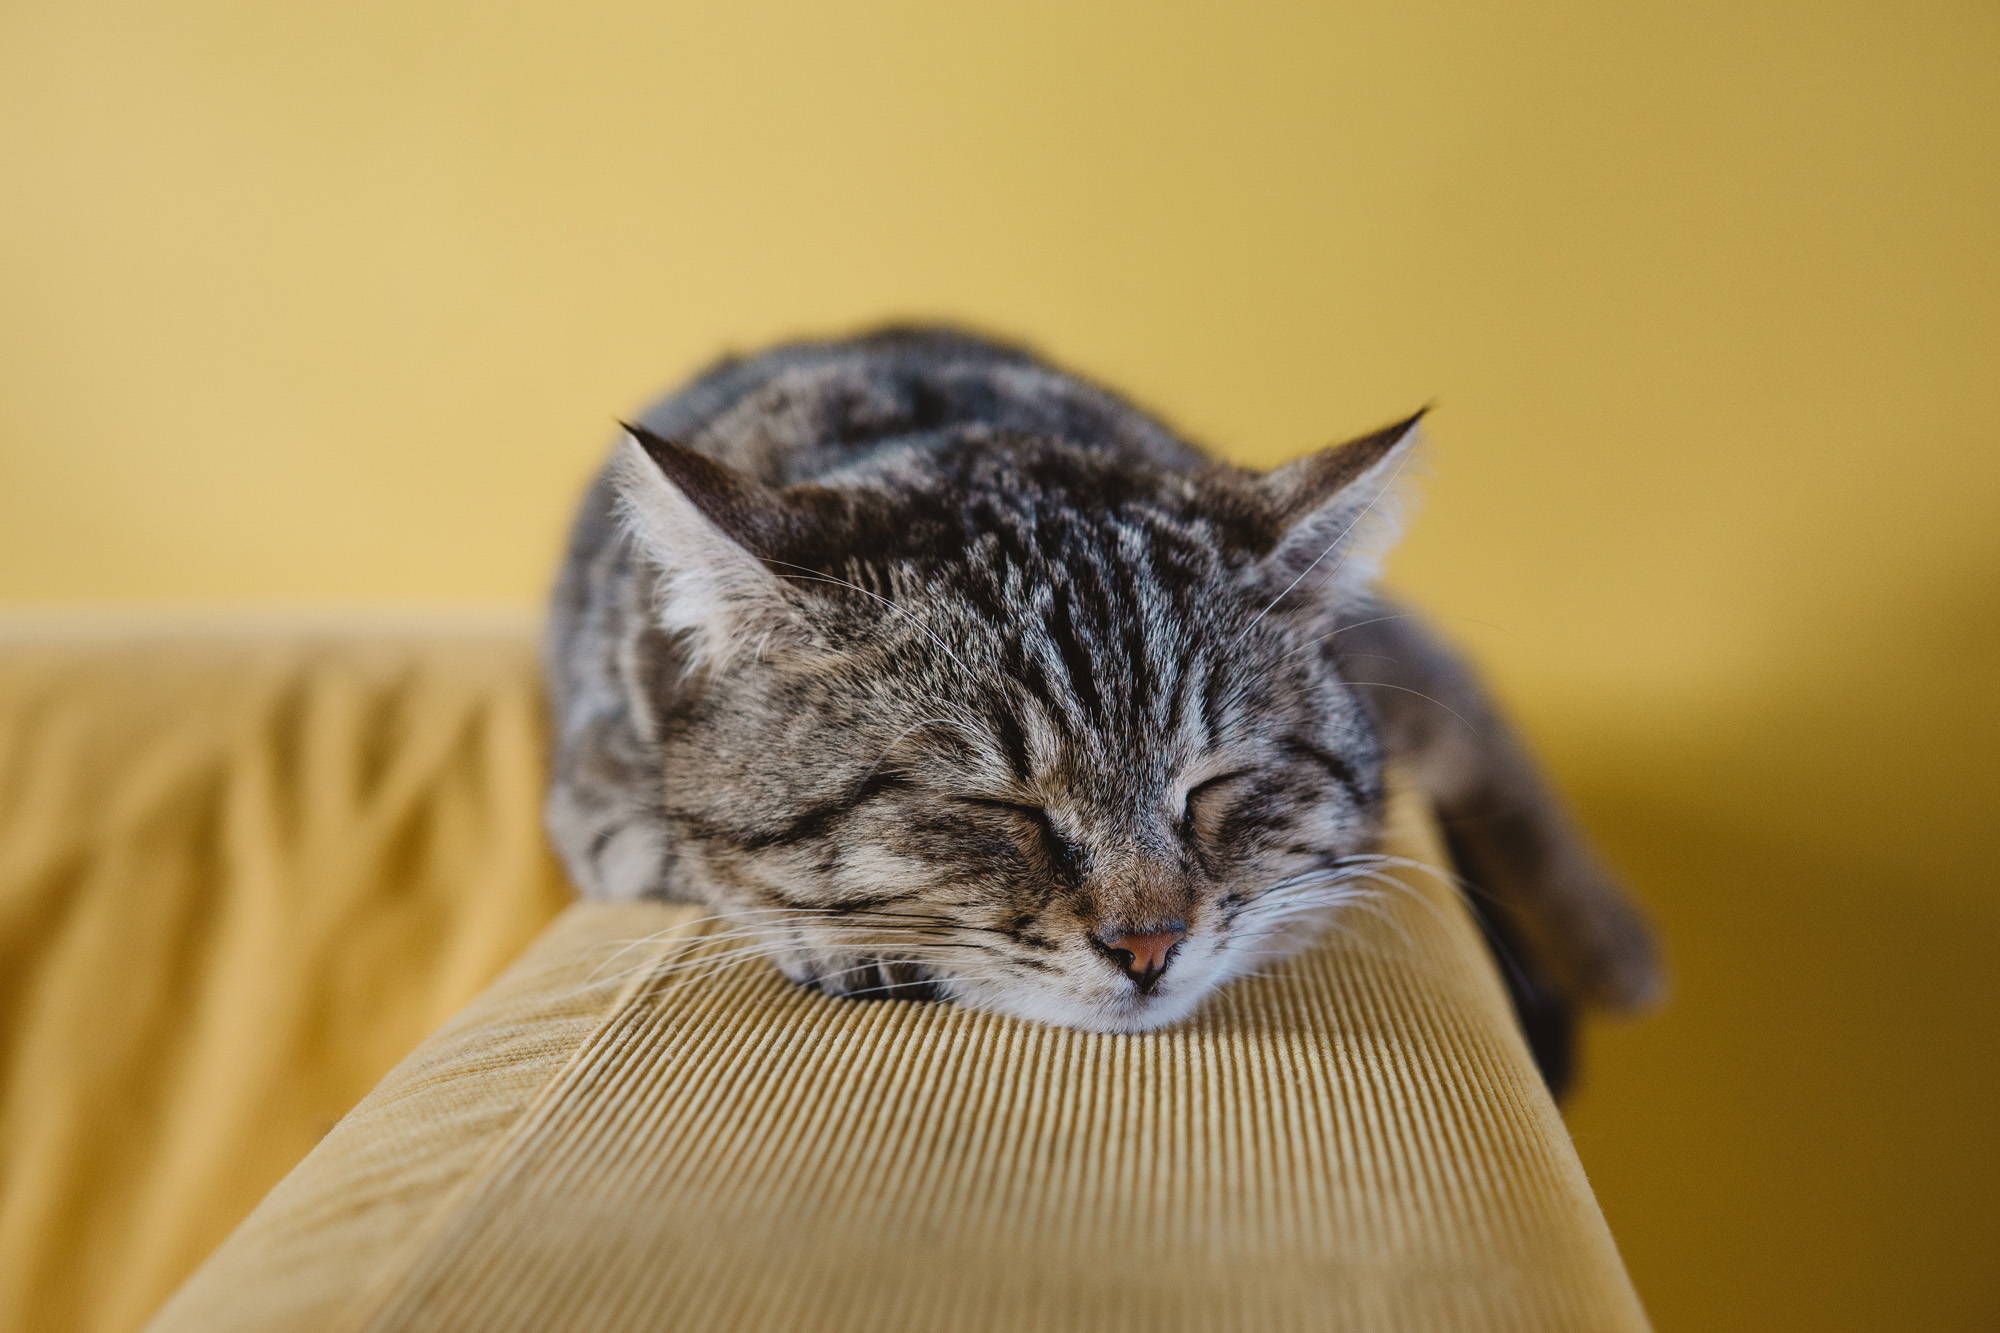 Acknowledge you deserve relaxation time - relaxing cat